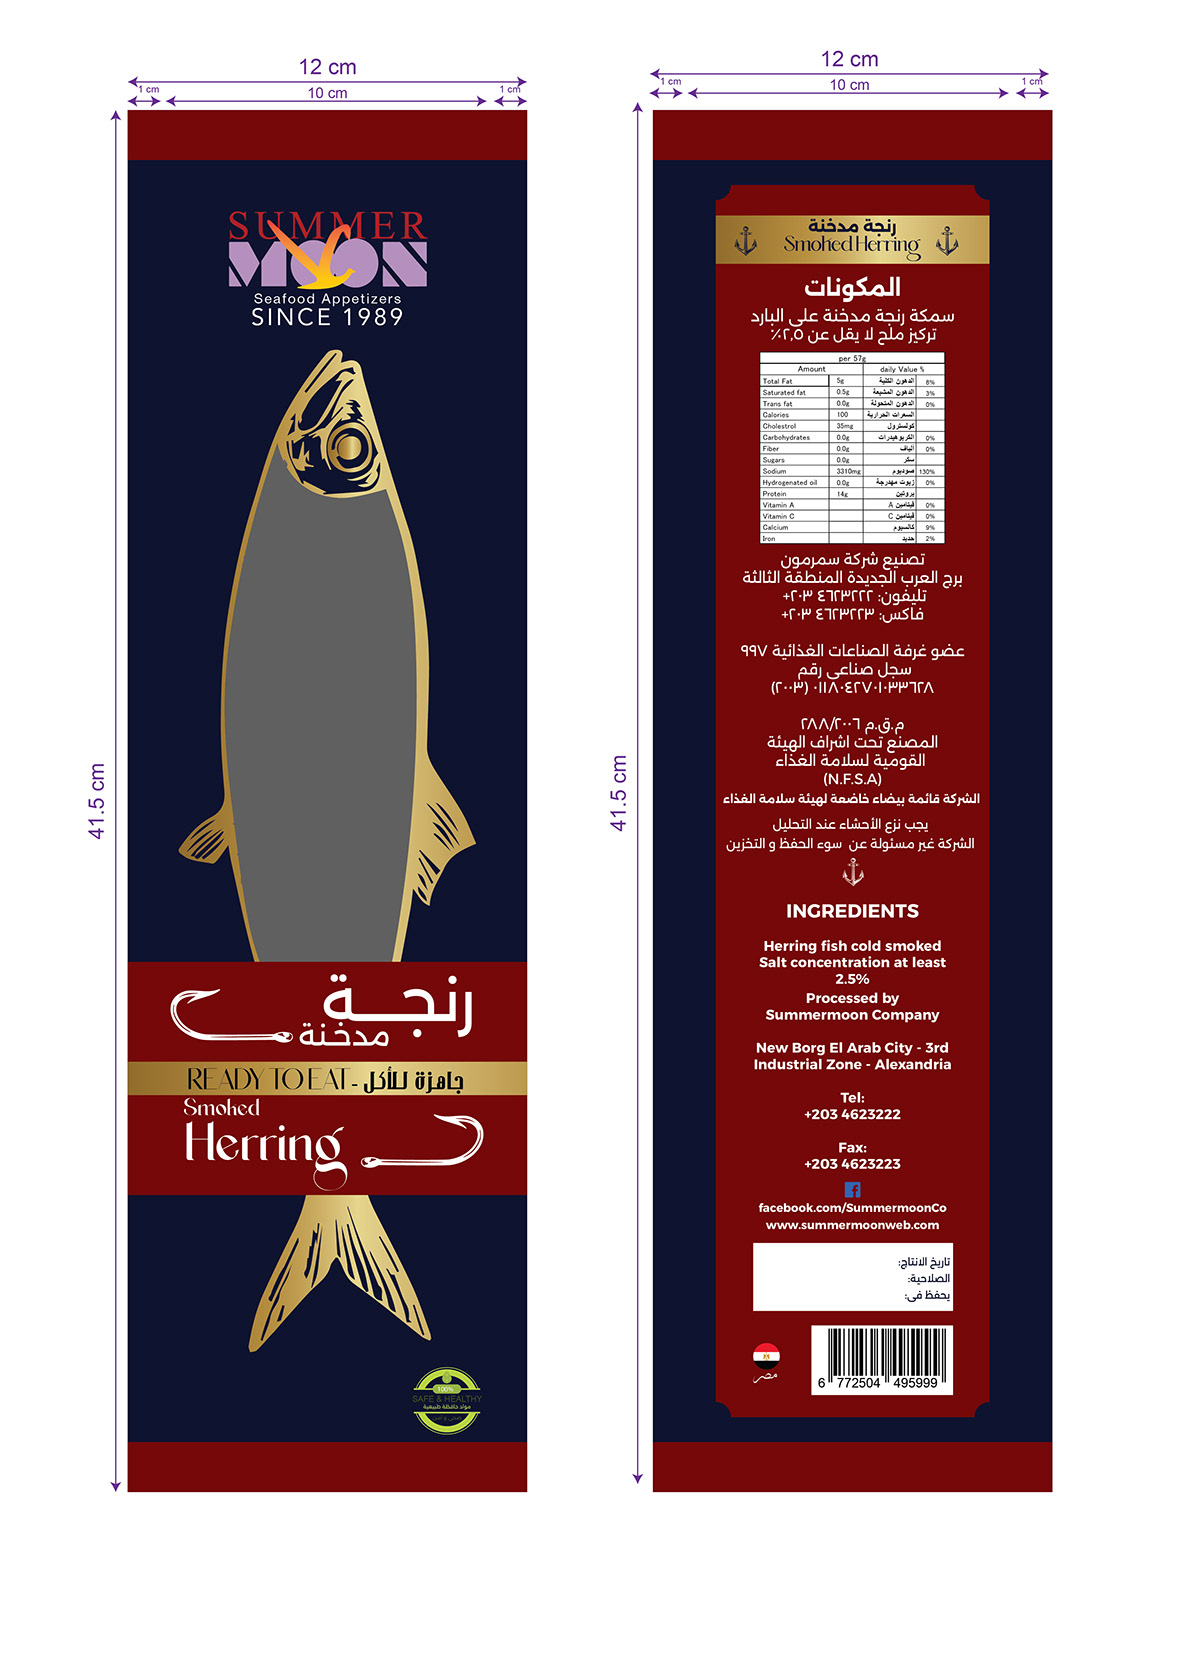 Packaging visual identity brand design packaging design Illustrator brand identity visual herring package design 